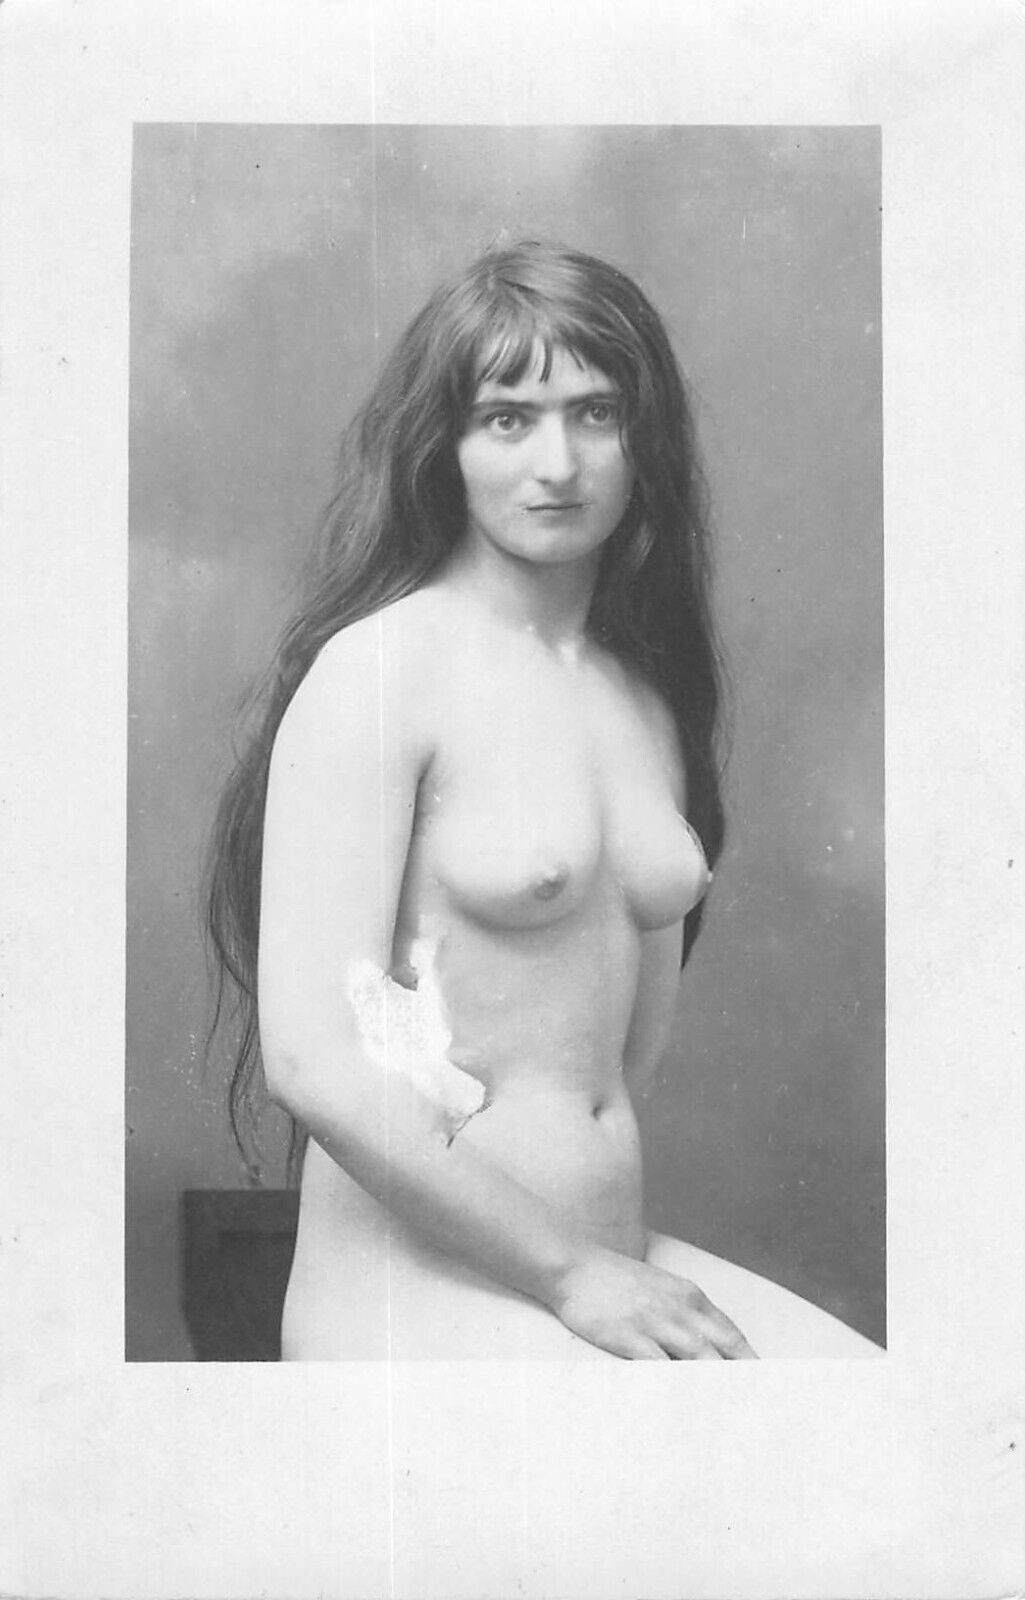 CPA / THEME NU / PHOTO CARD / WOMAN CERTAINLY NORTH AFRICA / BREAST NUDE EN